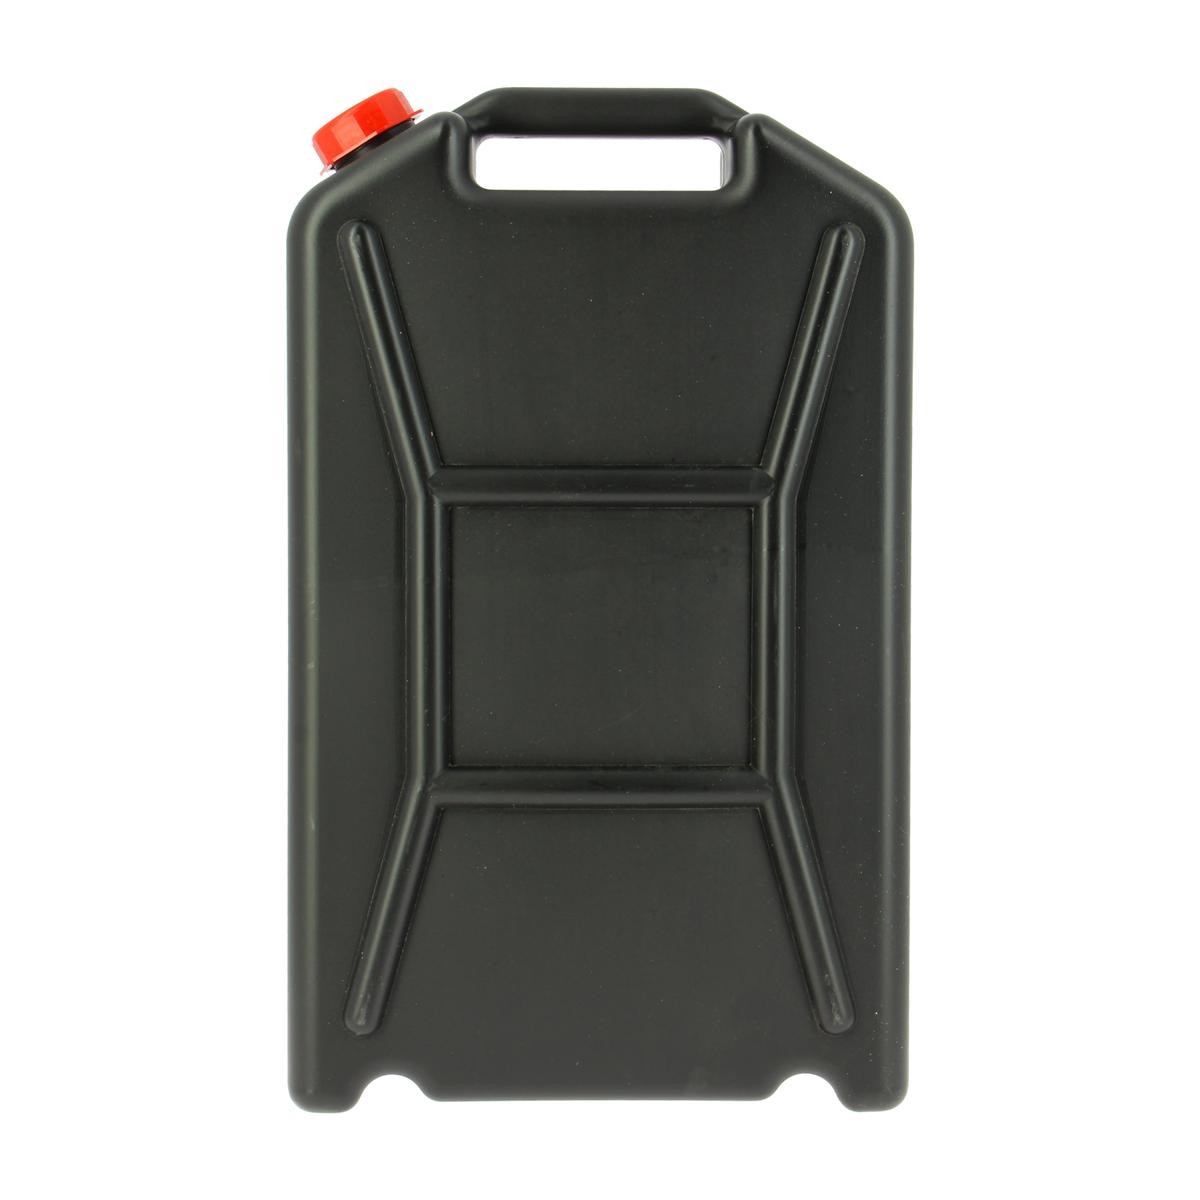 XL Jerry can 300110